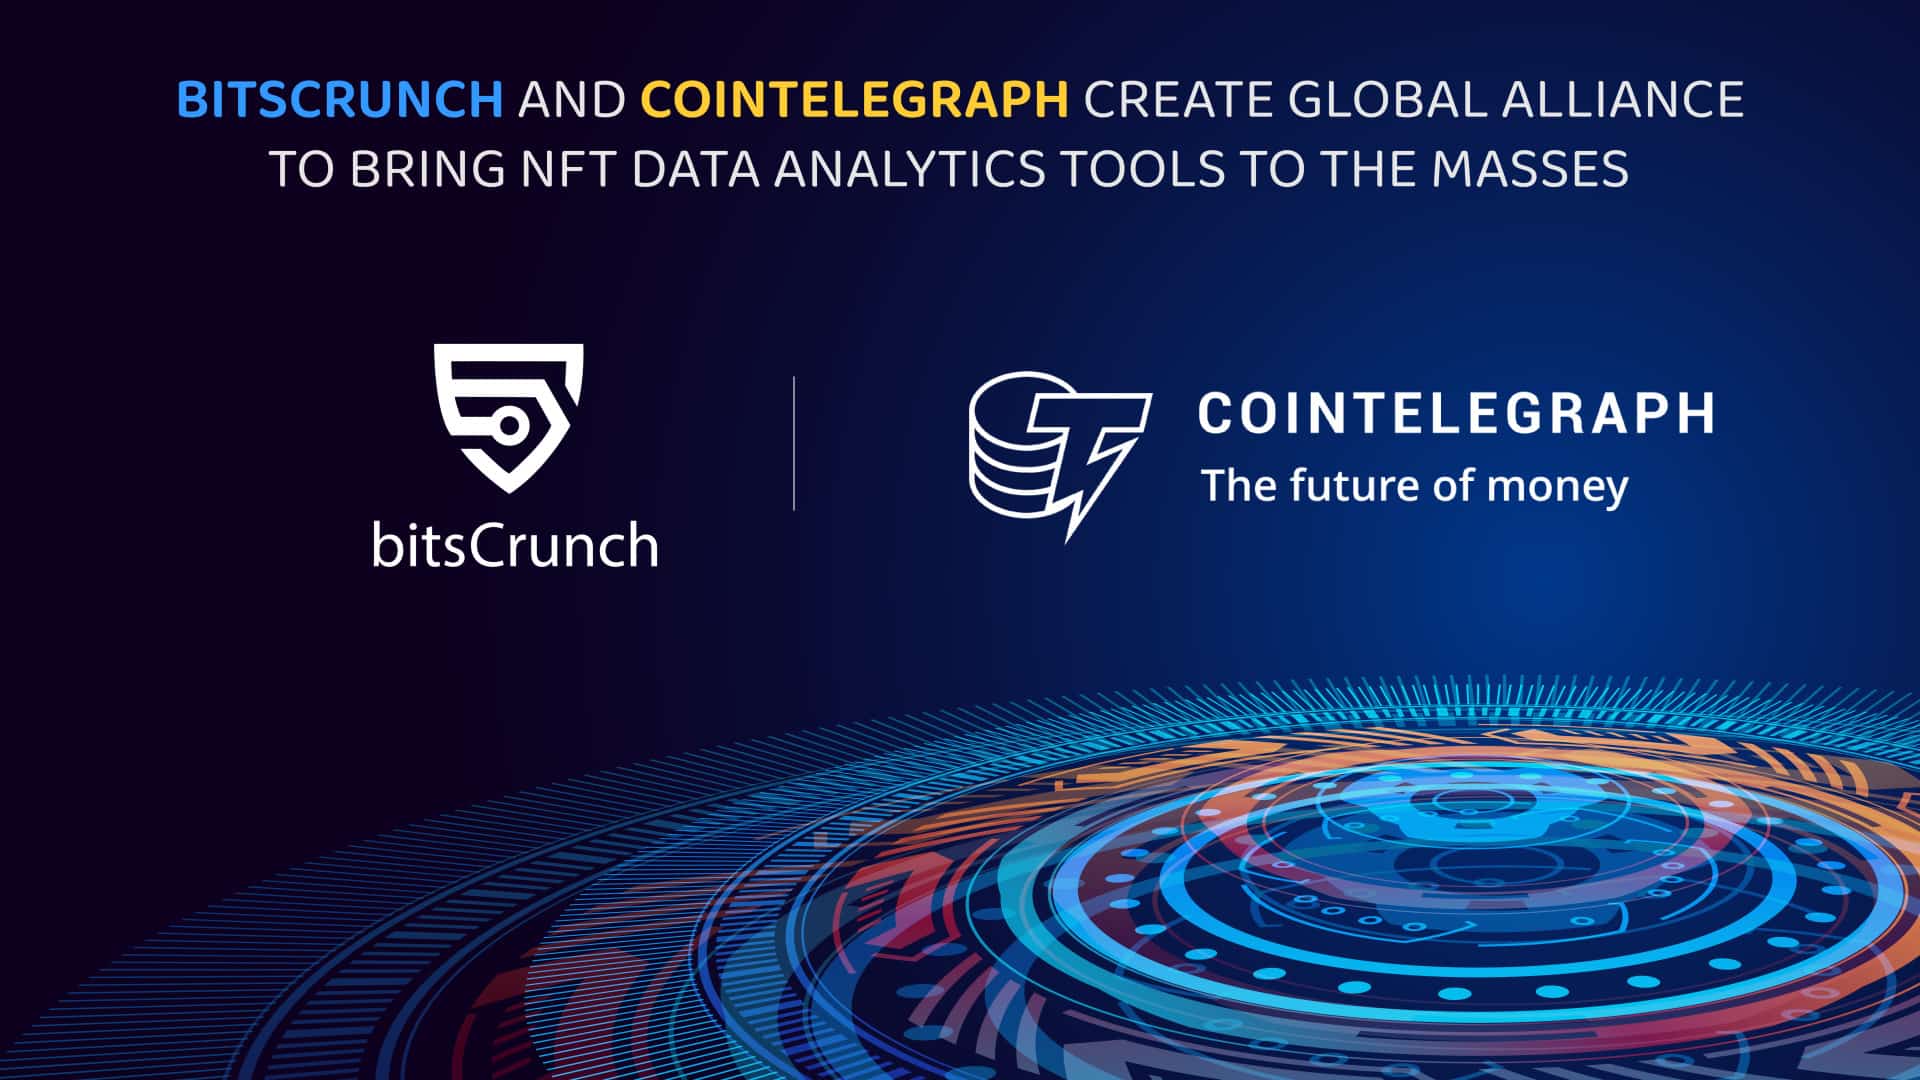 Bitscrunch-and-cointelegraph-create-global-alliance-to-develop-nft-data-analytics-tools